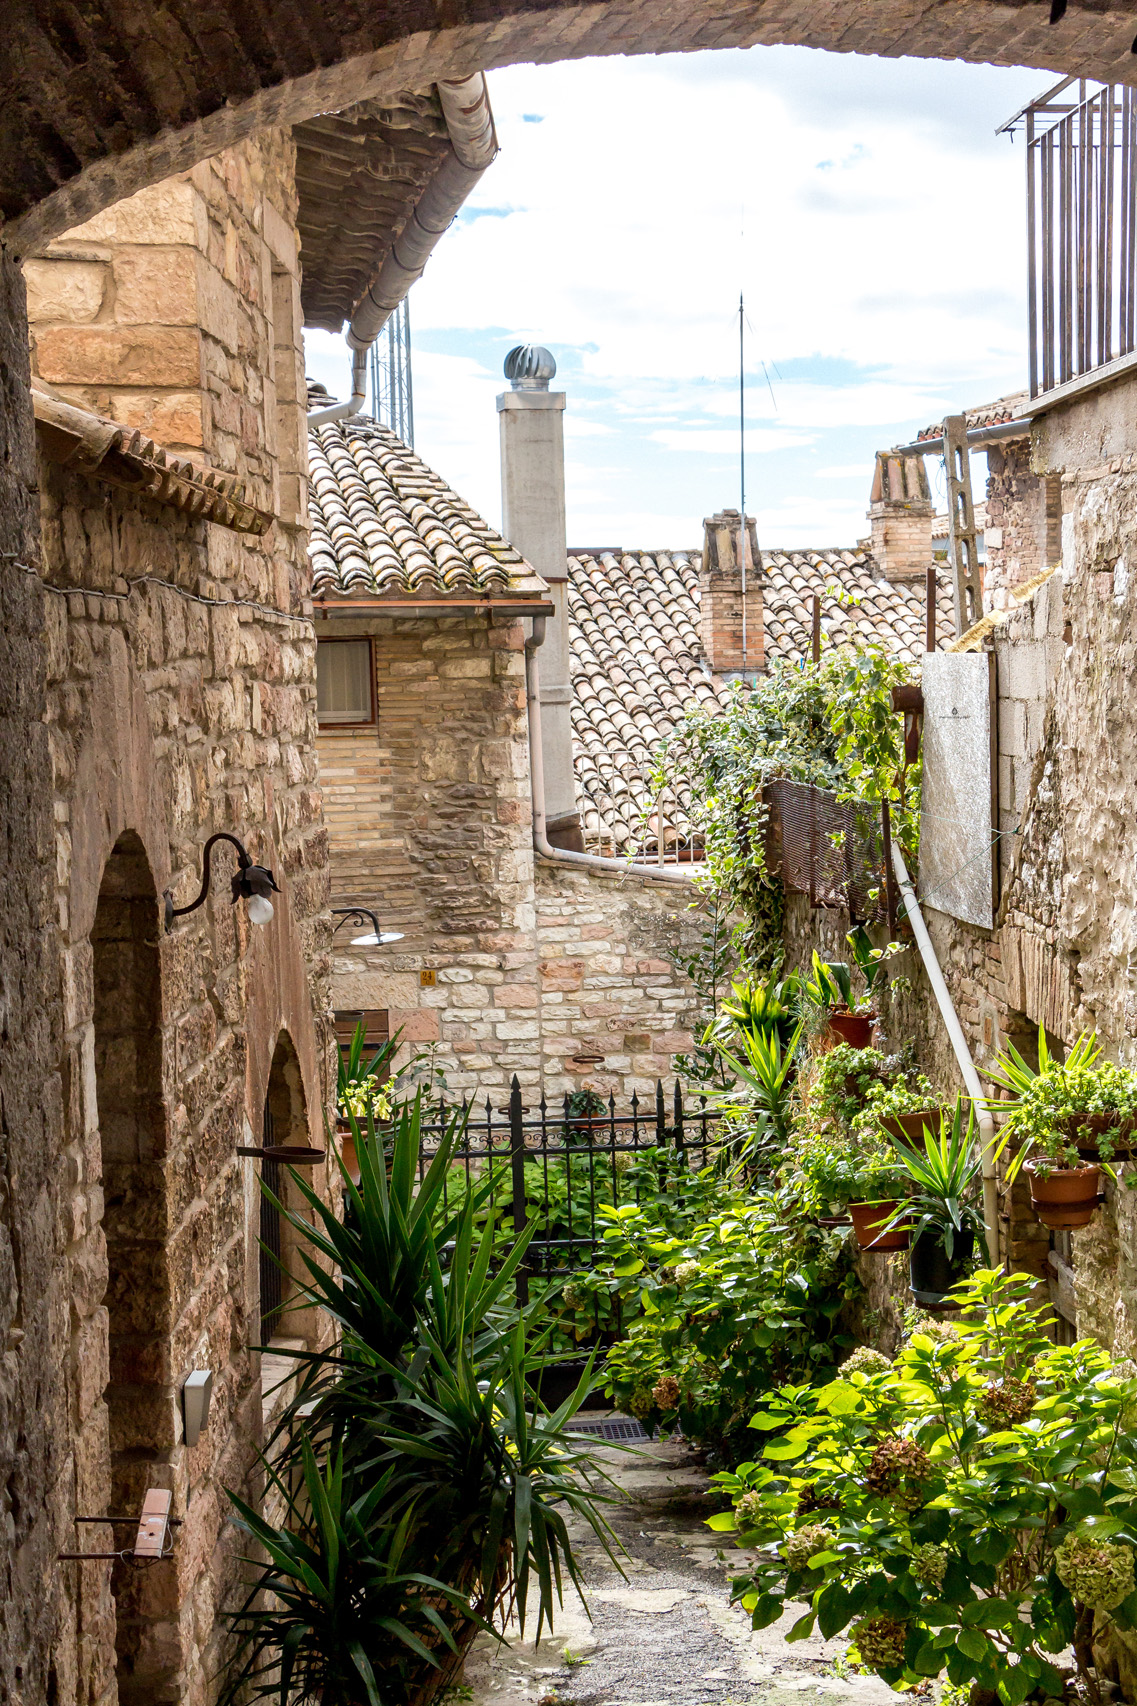 Courtyard in Assisi, Umbria